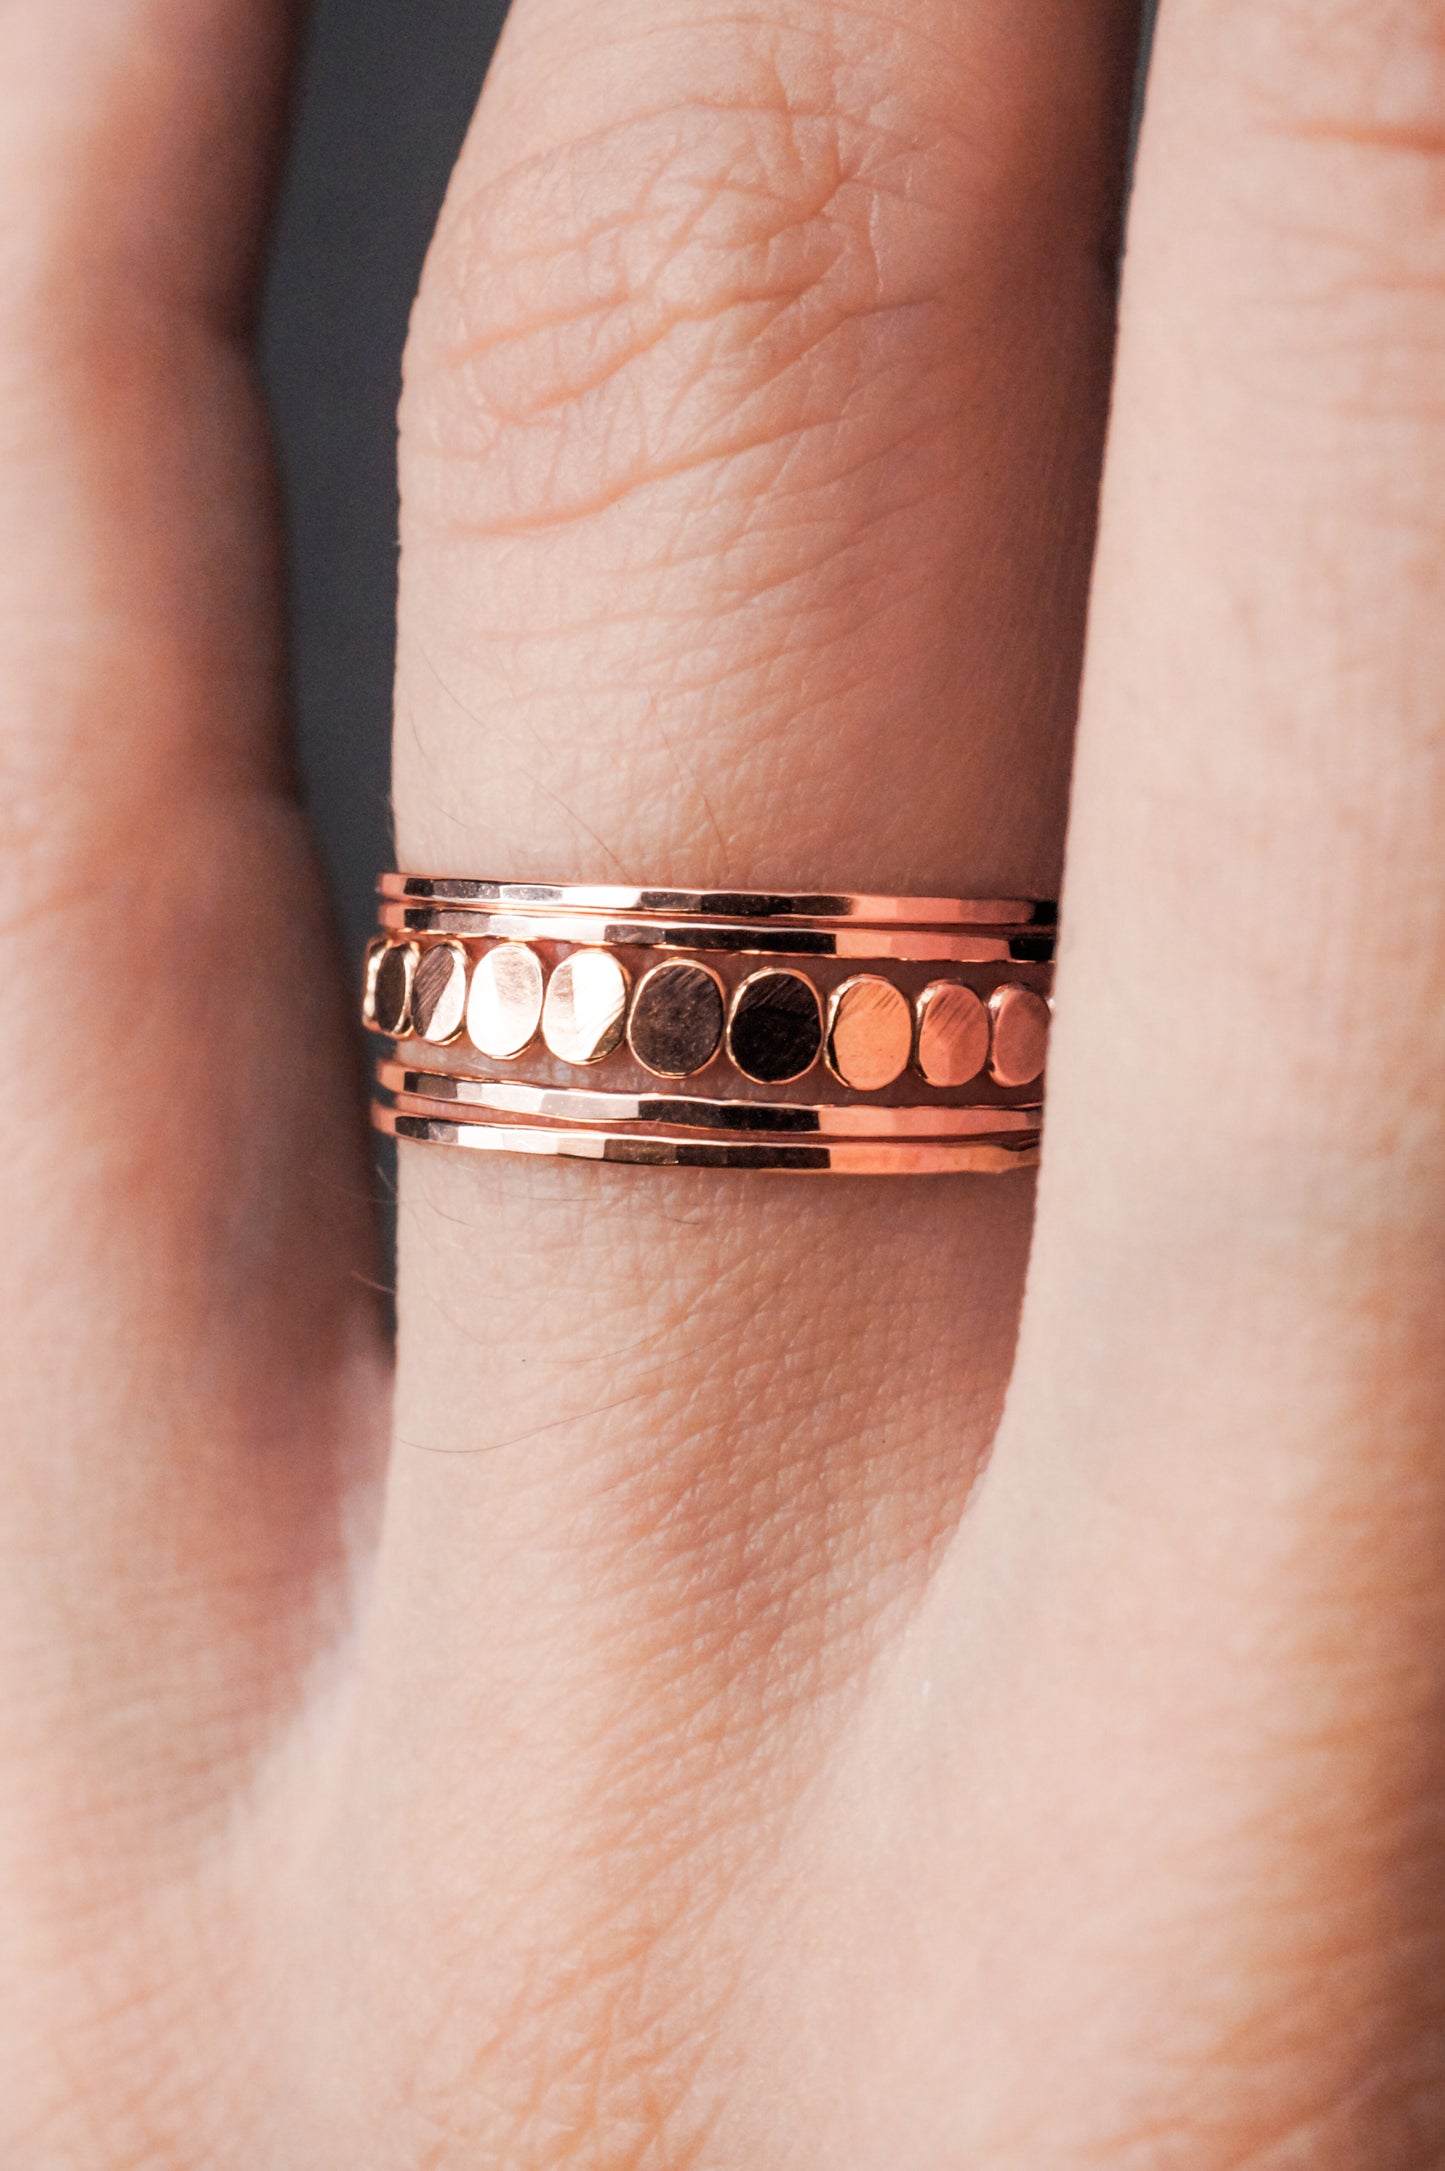 The Minimal Bead Set of 5 Stacking Rings, Gold Fill, Rose Gold Fill or Sterling Silver